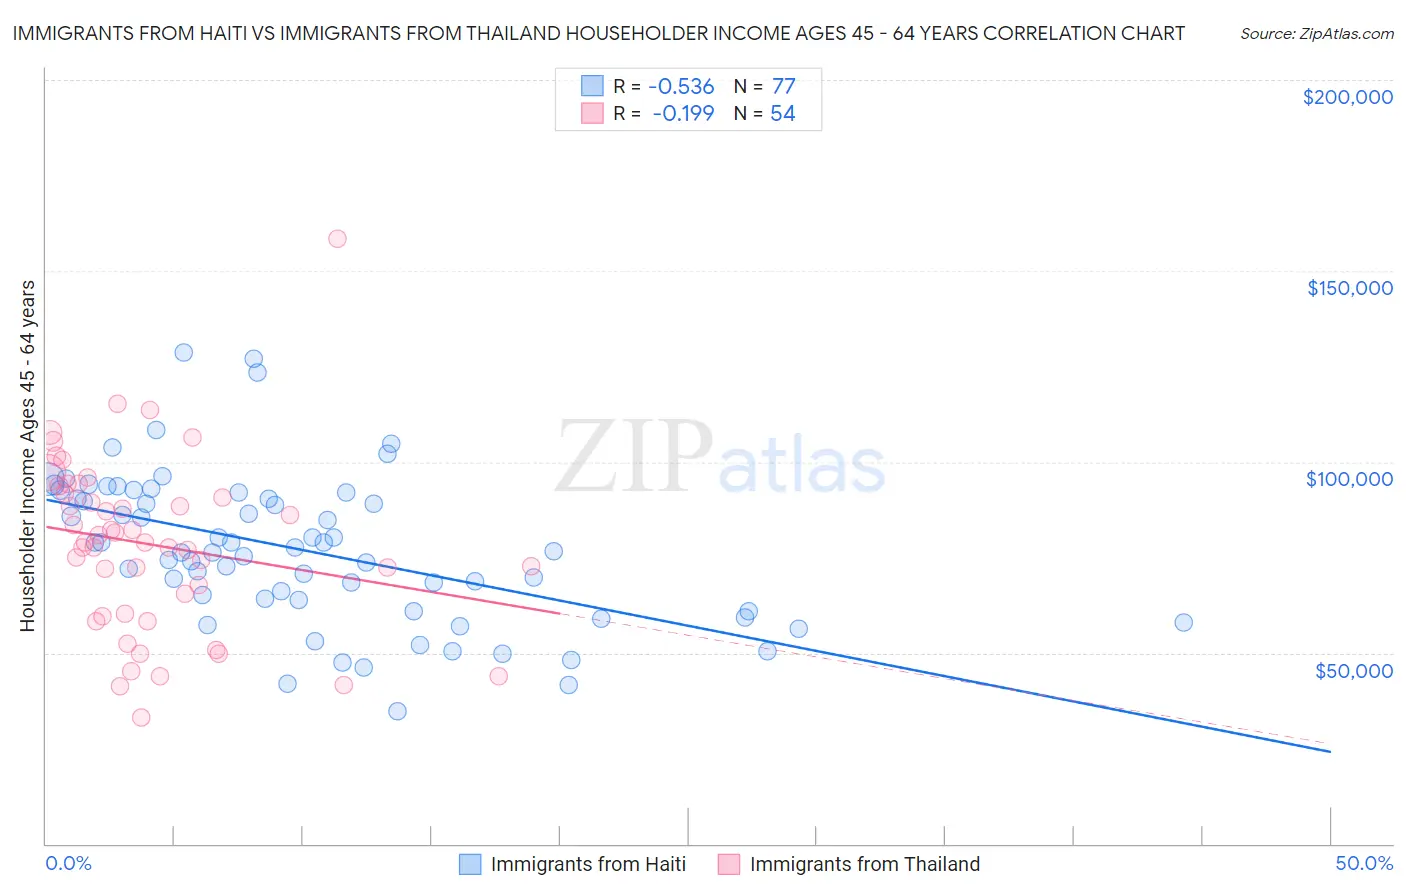 Immigrants from Haiti vs Immigrants from Thailand Householder Income Ages 45 - 64 years